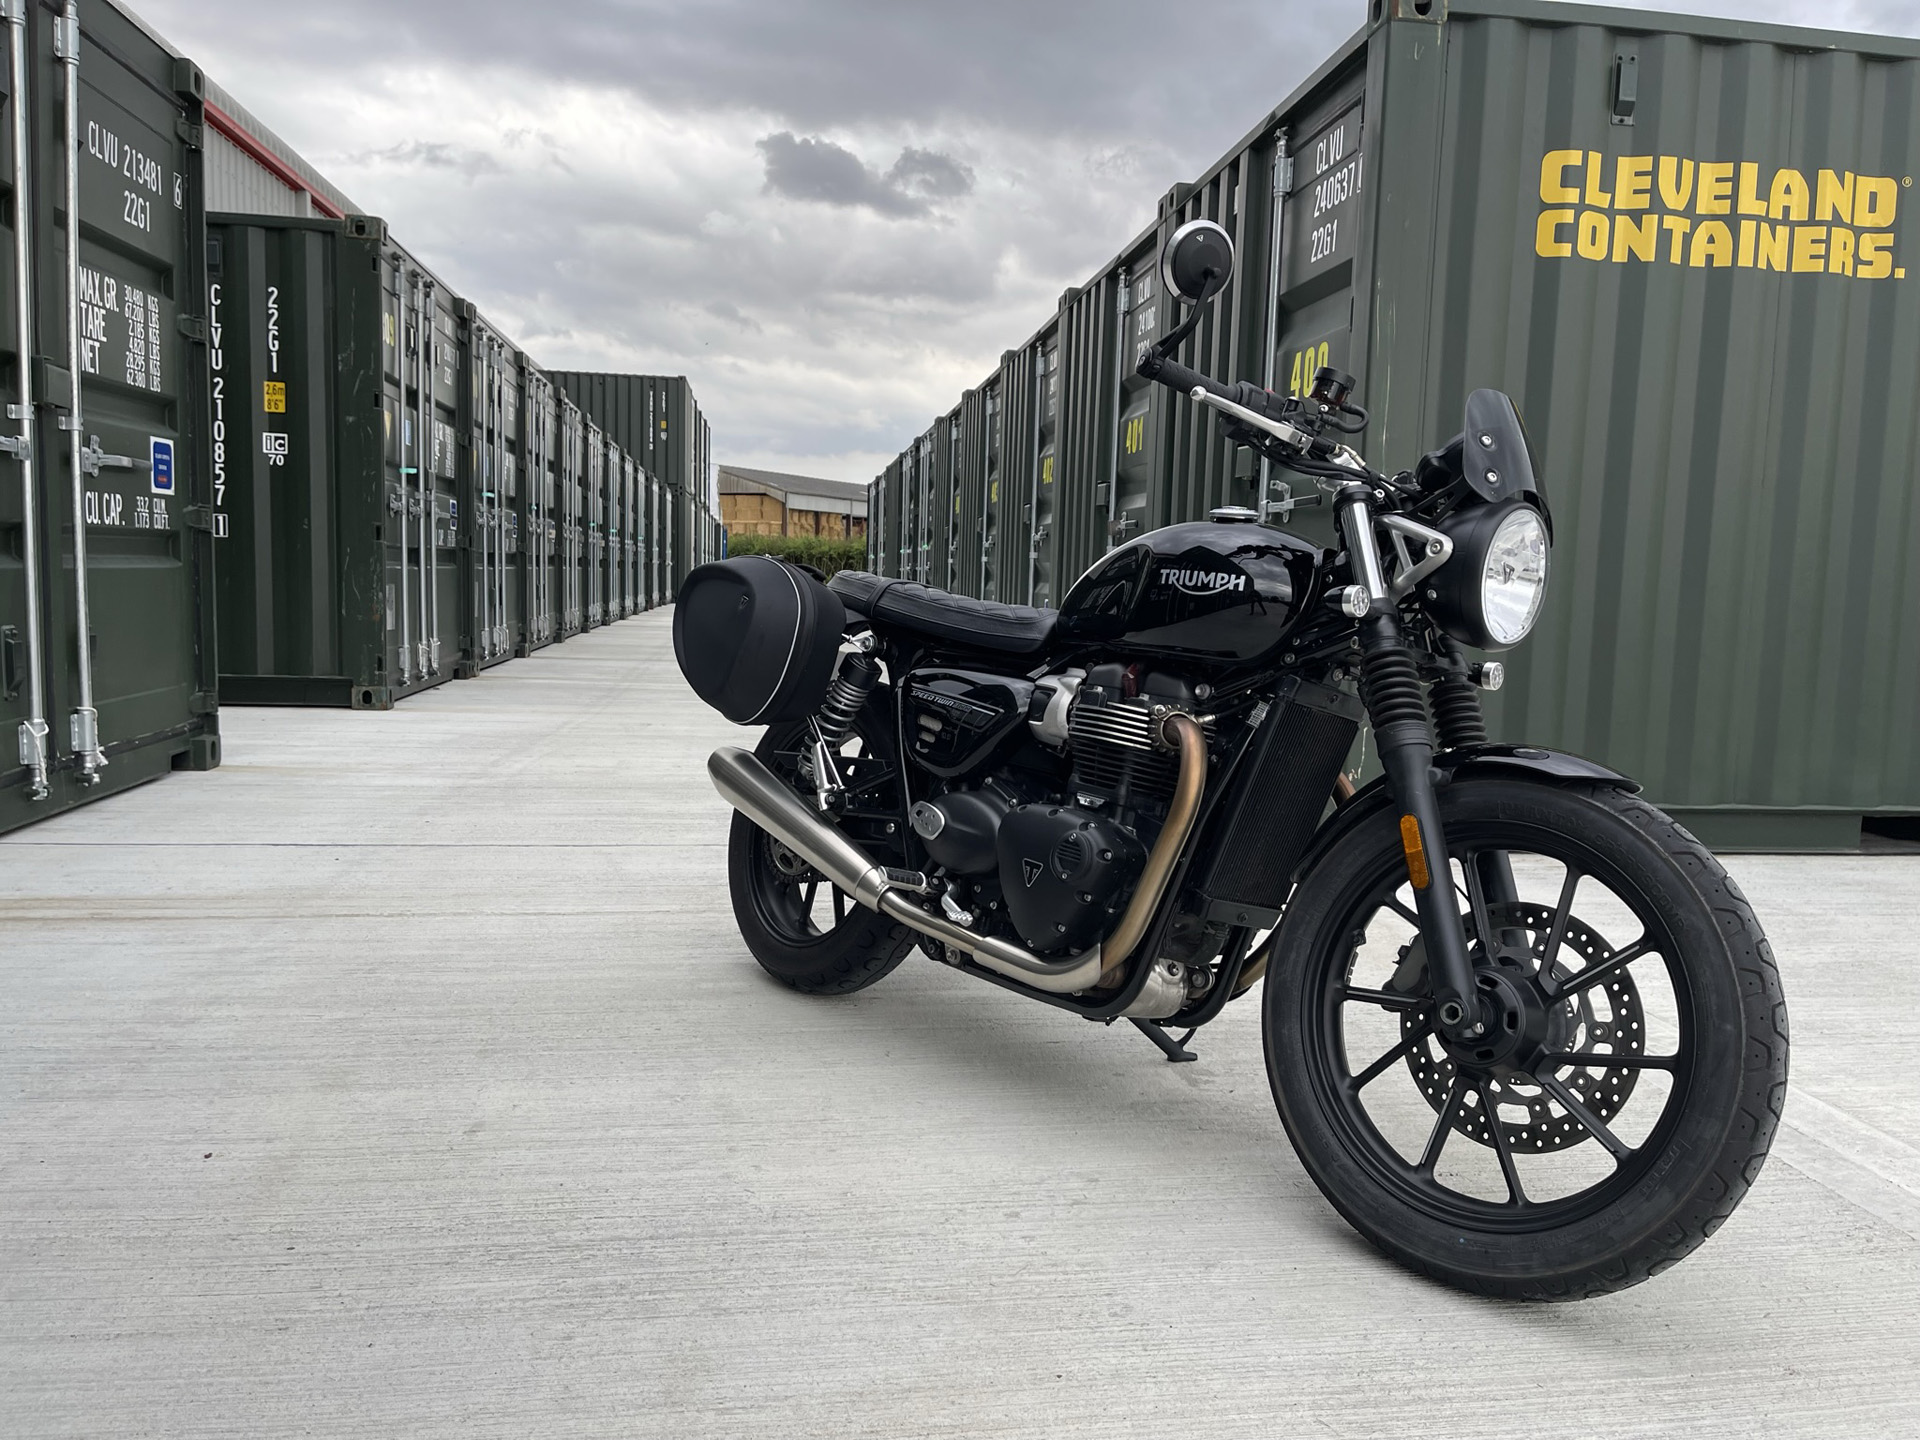 Triumph Speed Twin 900 photoshoot with some containers